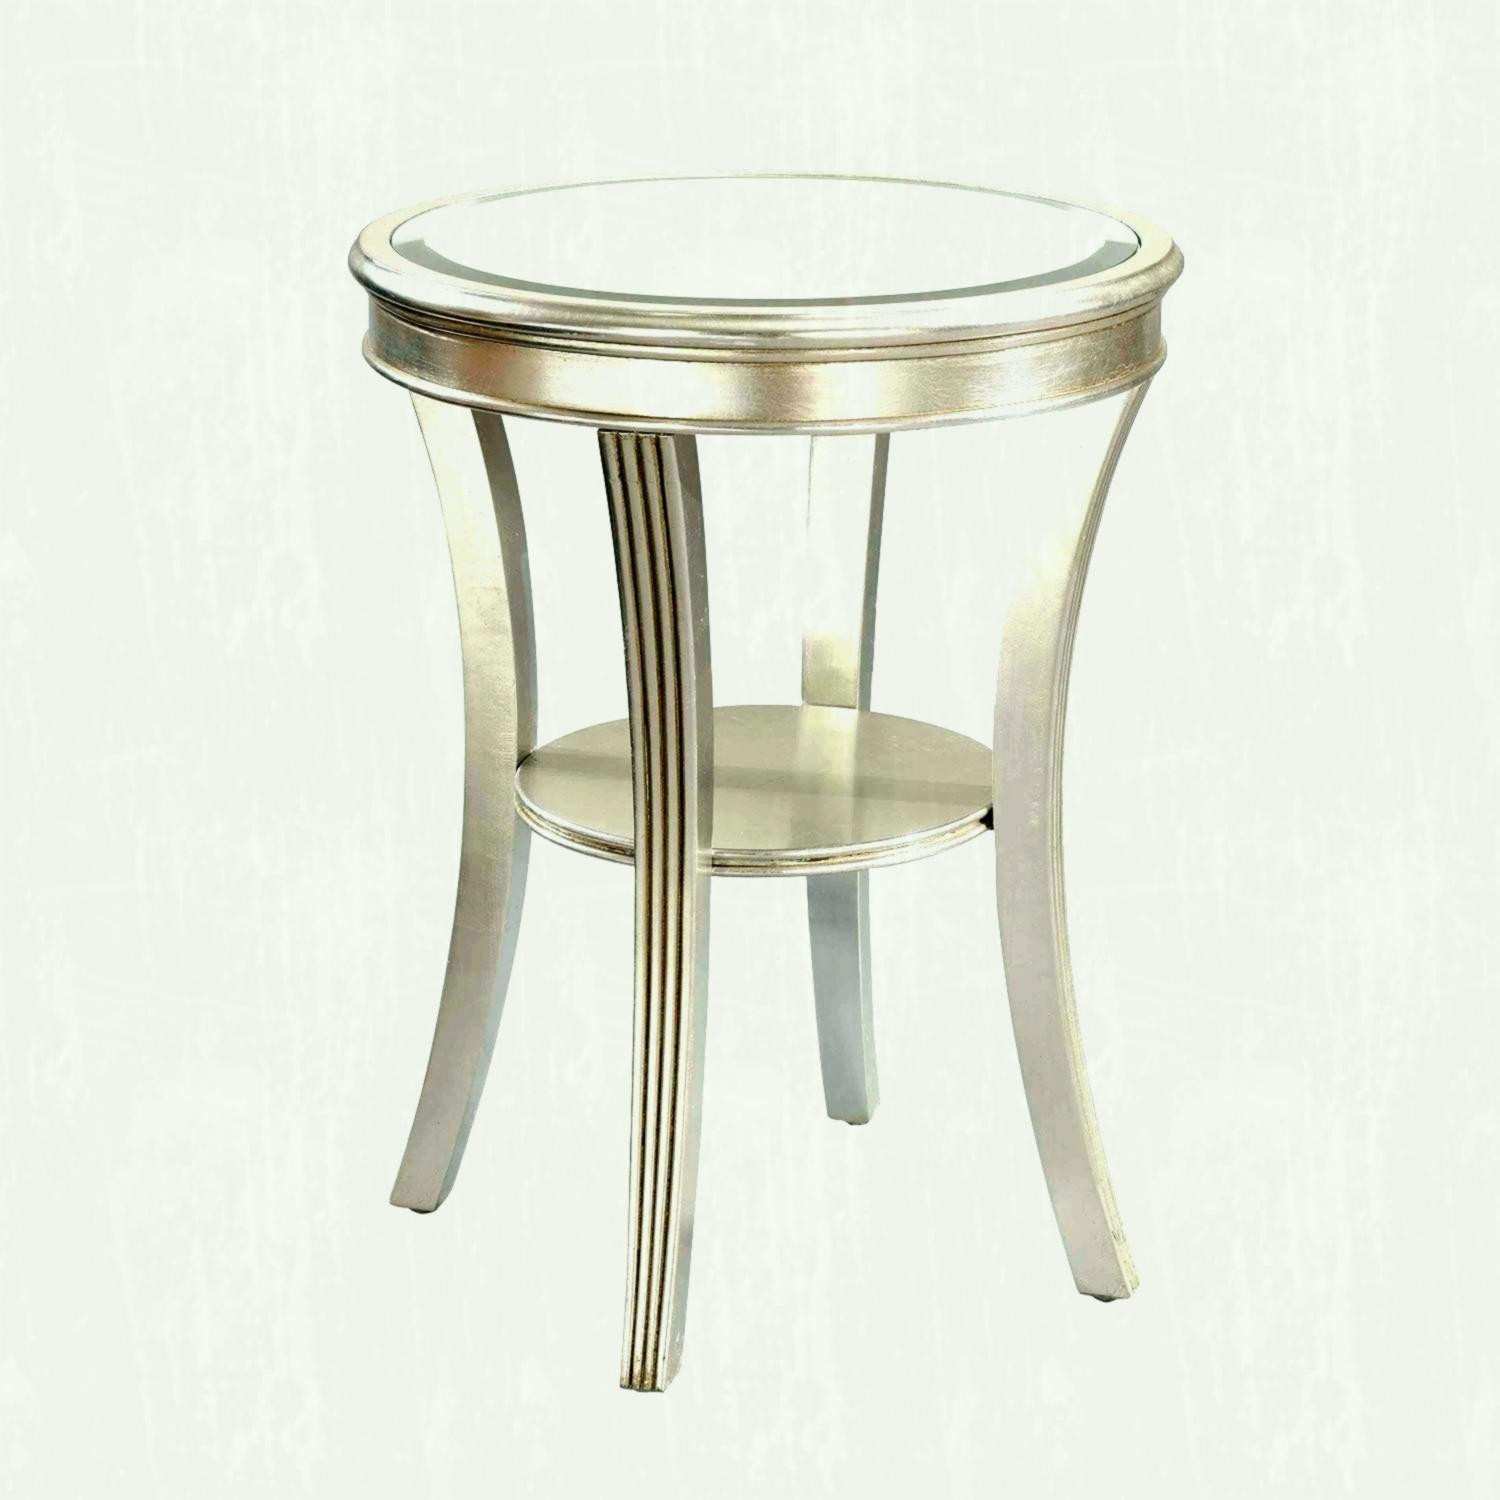 luxury small glass side table for and metal fice desk gold arley accent front leather ott coffee farmhouse kitchen furniture round bedside floral lamp dining set rugs target sofa